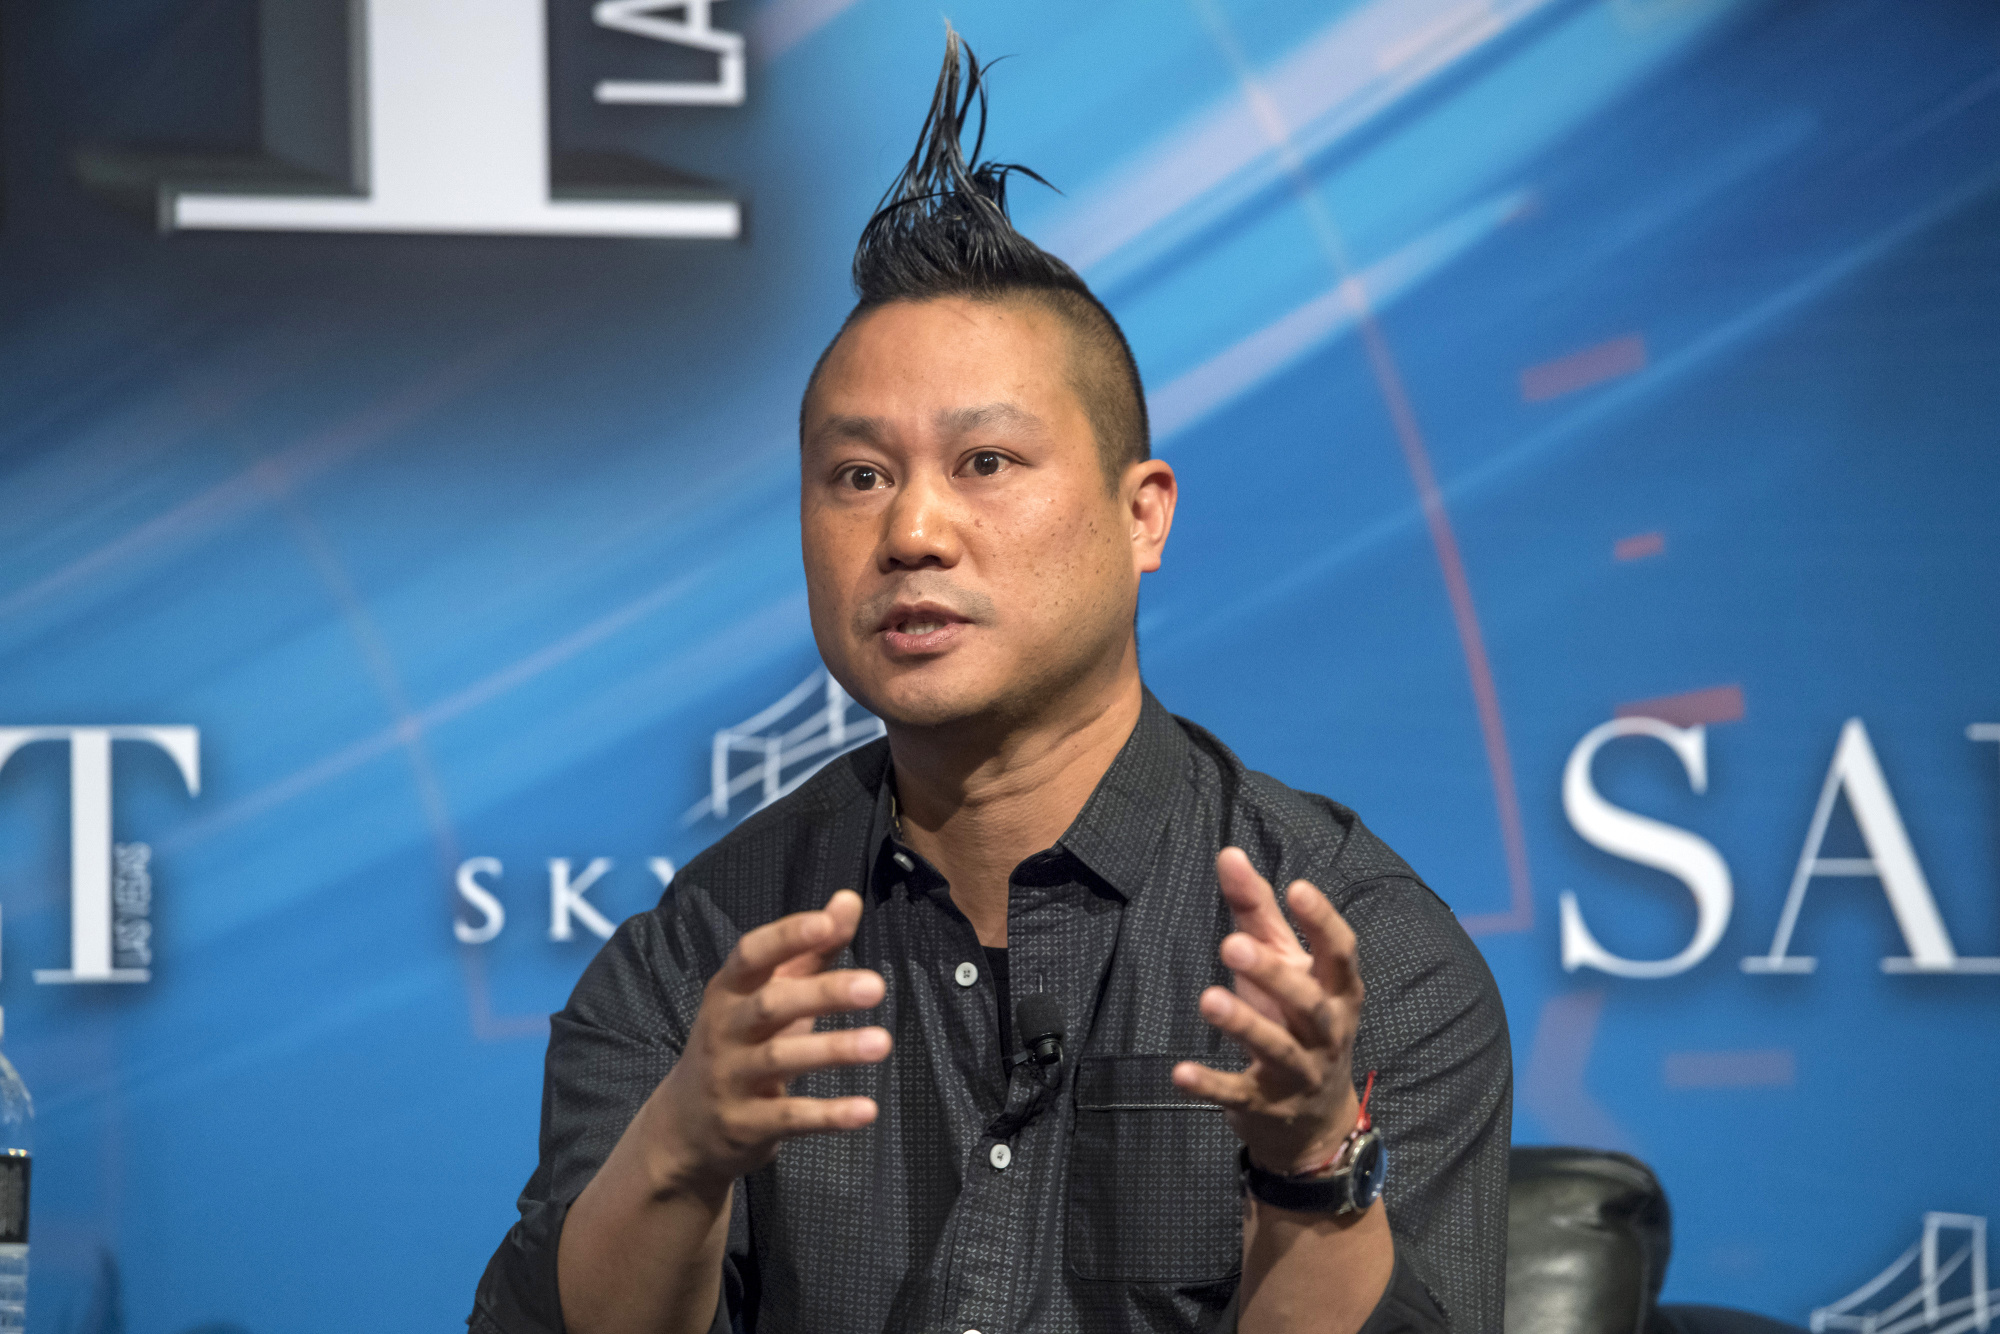 Tony Hsieh, CEO of Zappos.com Inc., speaks at the Skybridge Alternatives (SALT) Conference in Las Vegas, Nevada, United States on Thursday, May 18, 2017. The SALT Conference facilitates balanced discussion and debate on the macroeconomic trends, geopolitical events and alternative investment opportunities for the coming year.